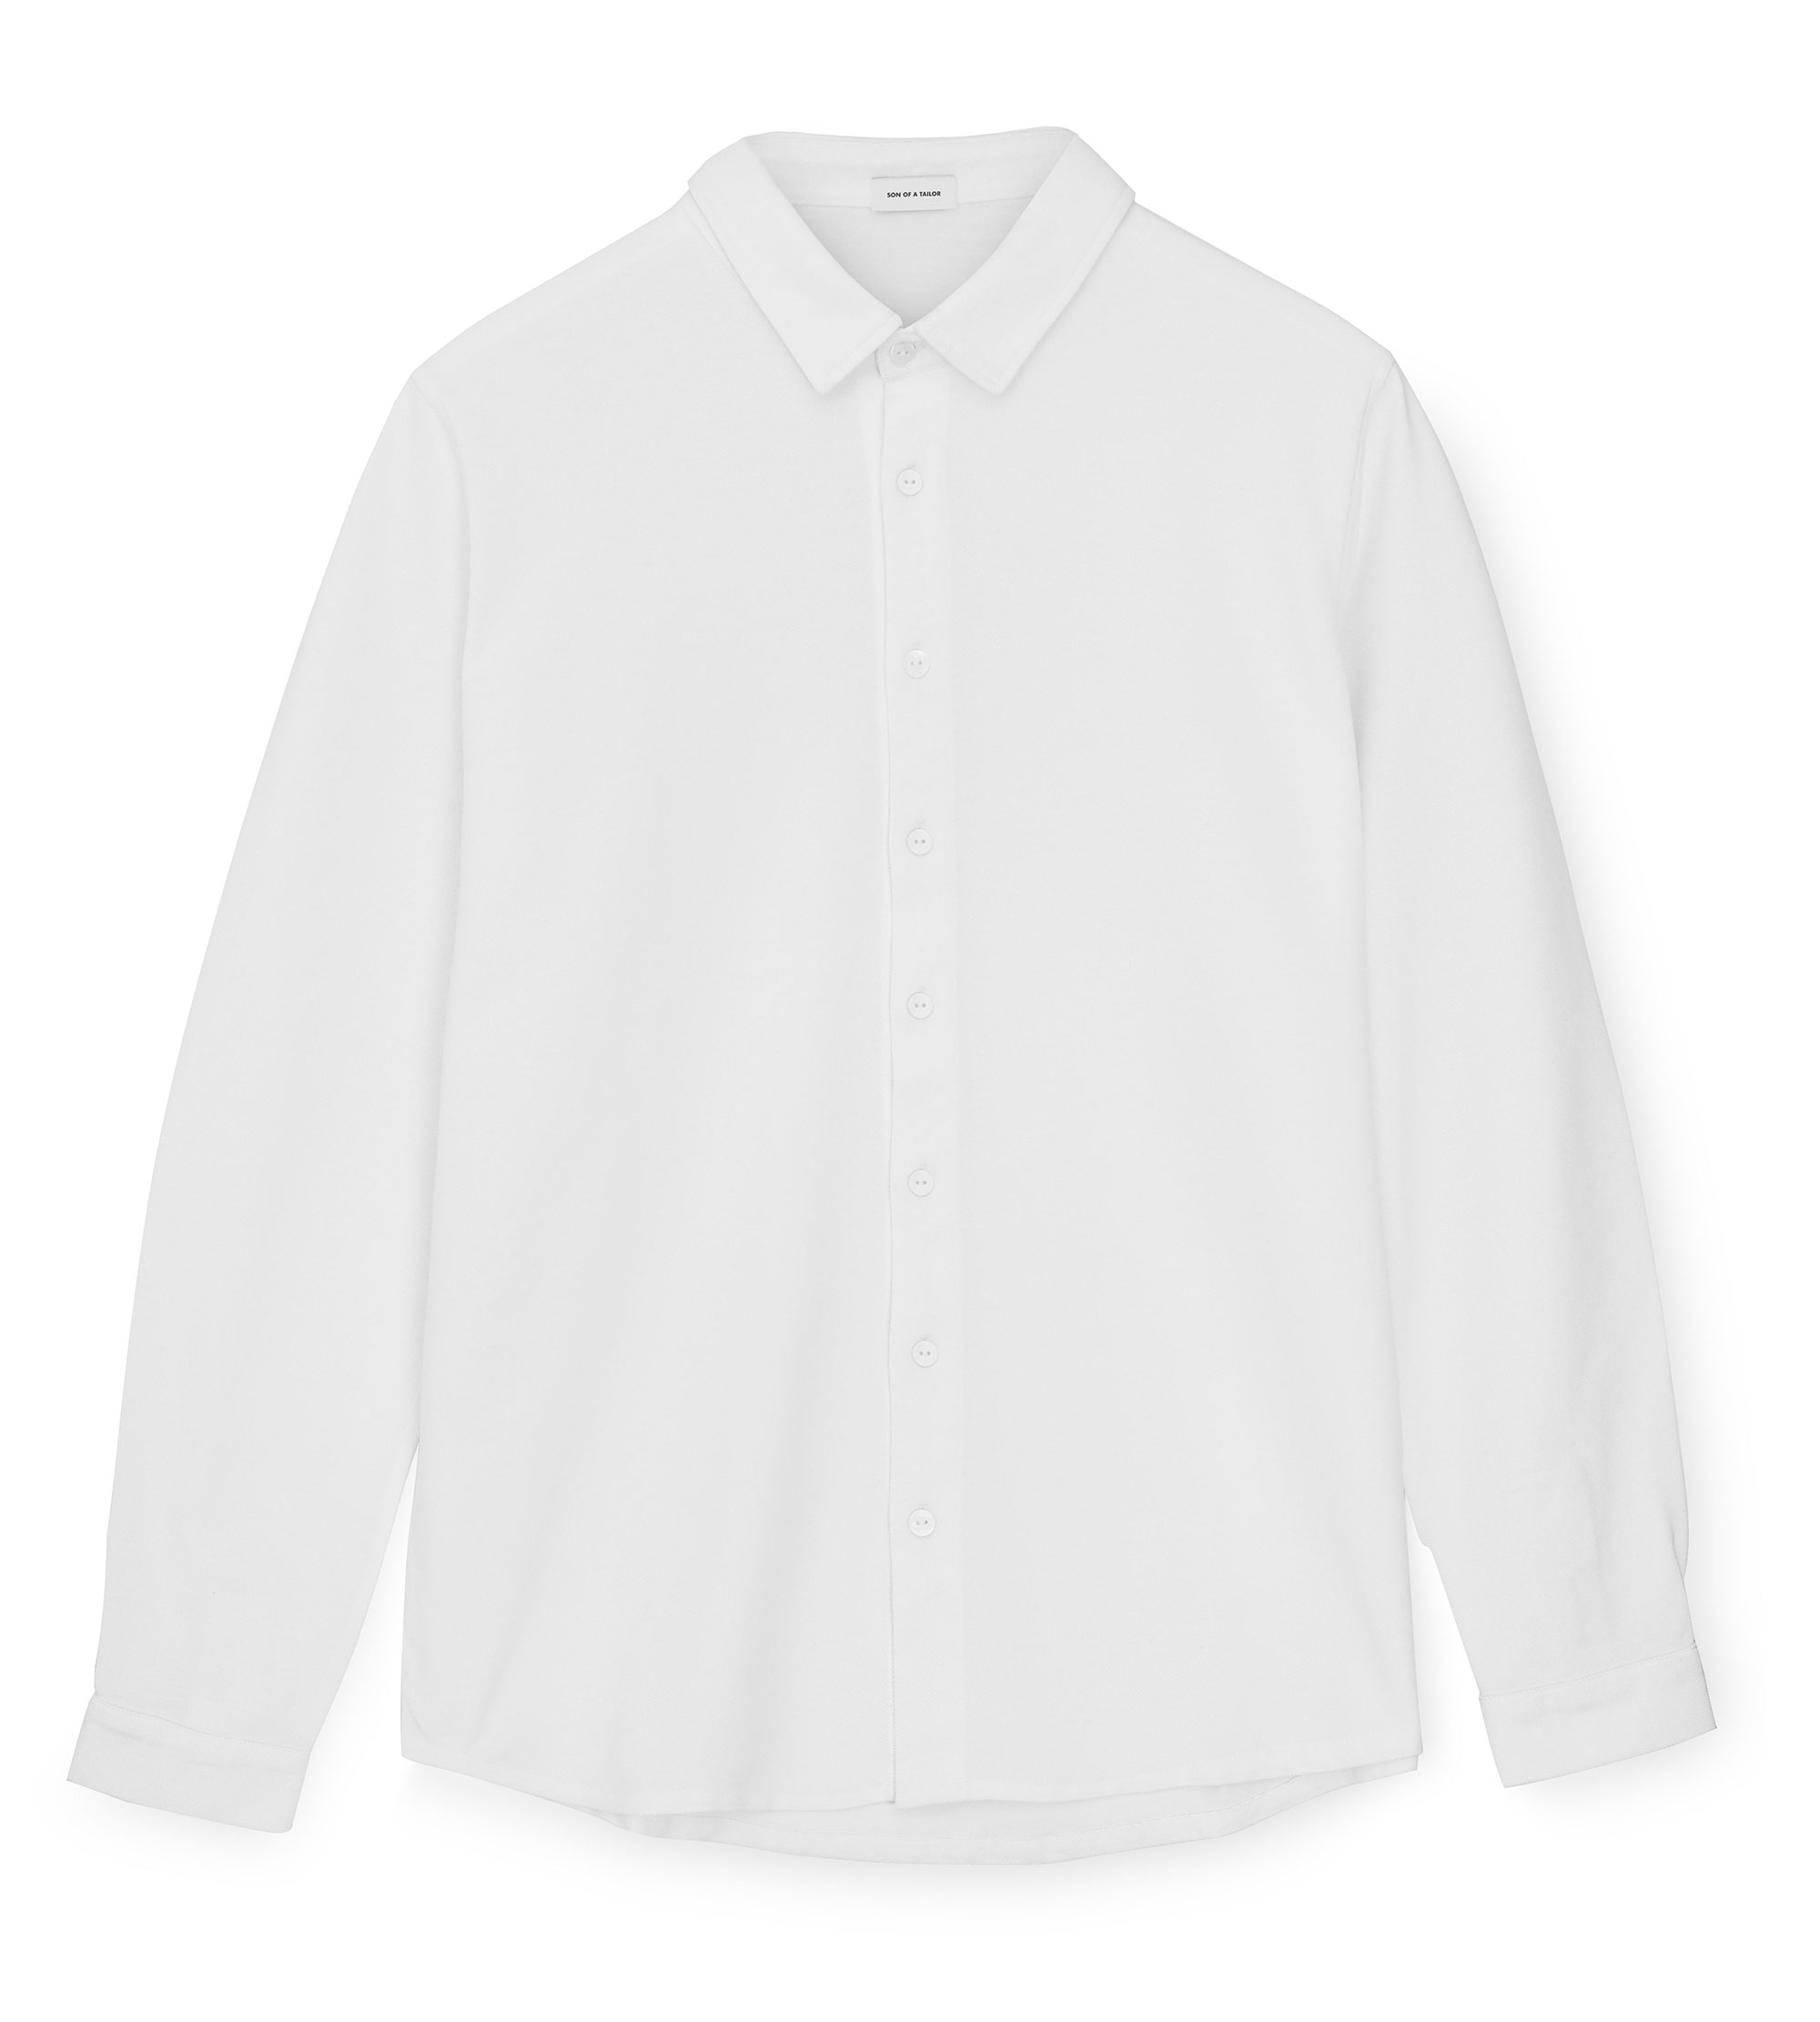 Custom Fitted Pique Shirt White | Son of a Tailor